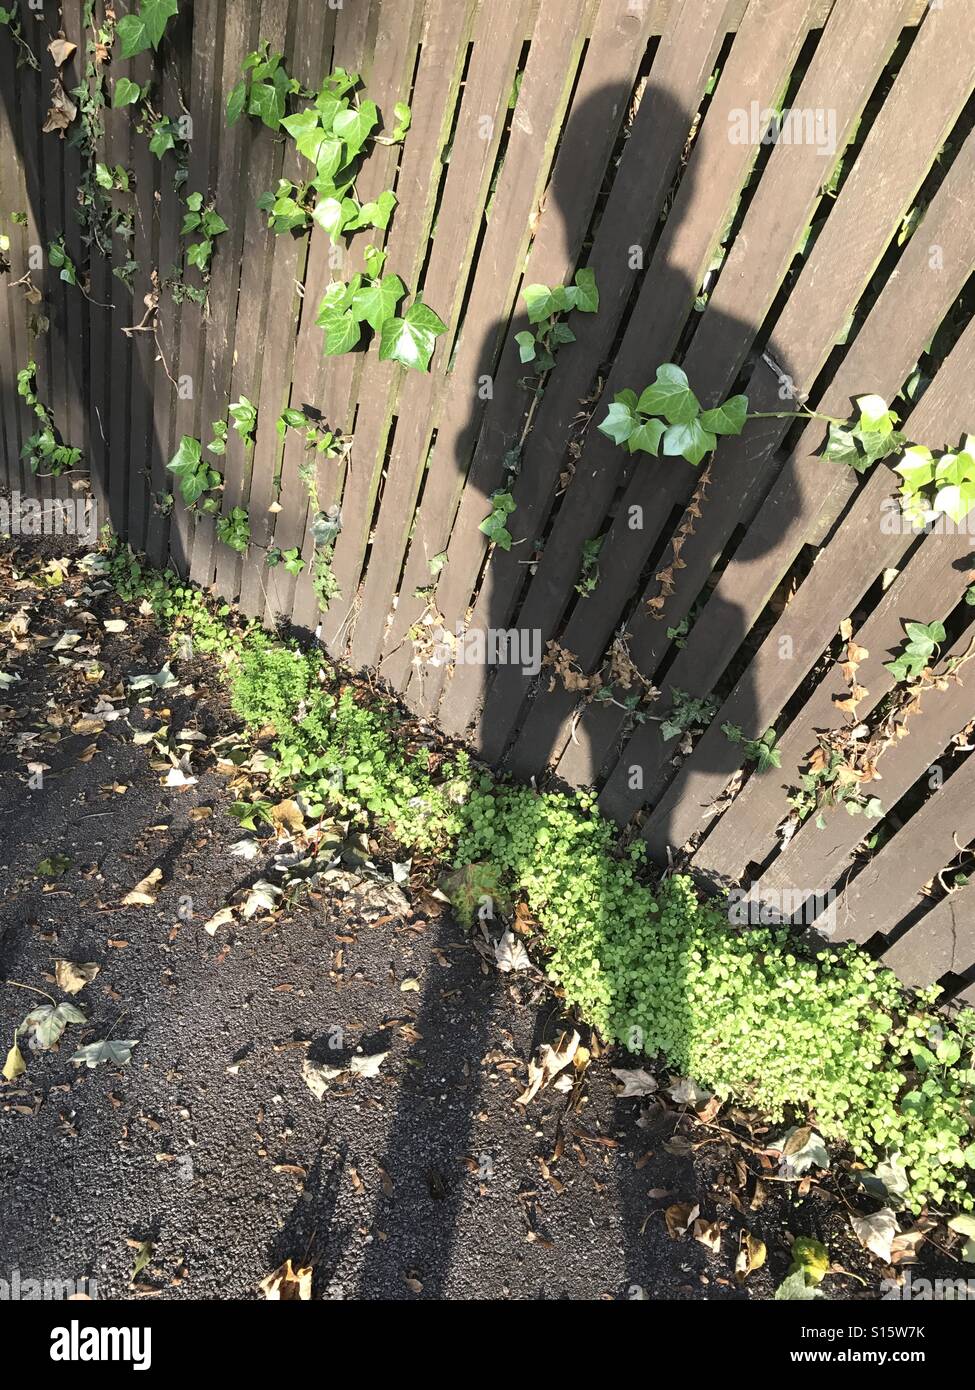 Shadow cast onto wooden fence and tarmac pavement, fence with green ivy growing on it and green weeds growing in tarmac of pavement Stock Photo